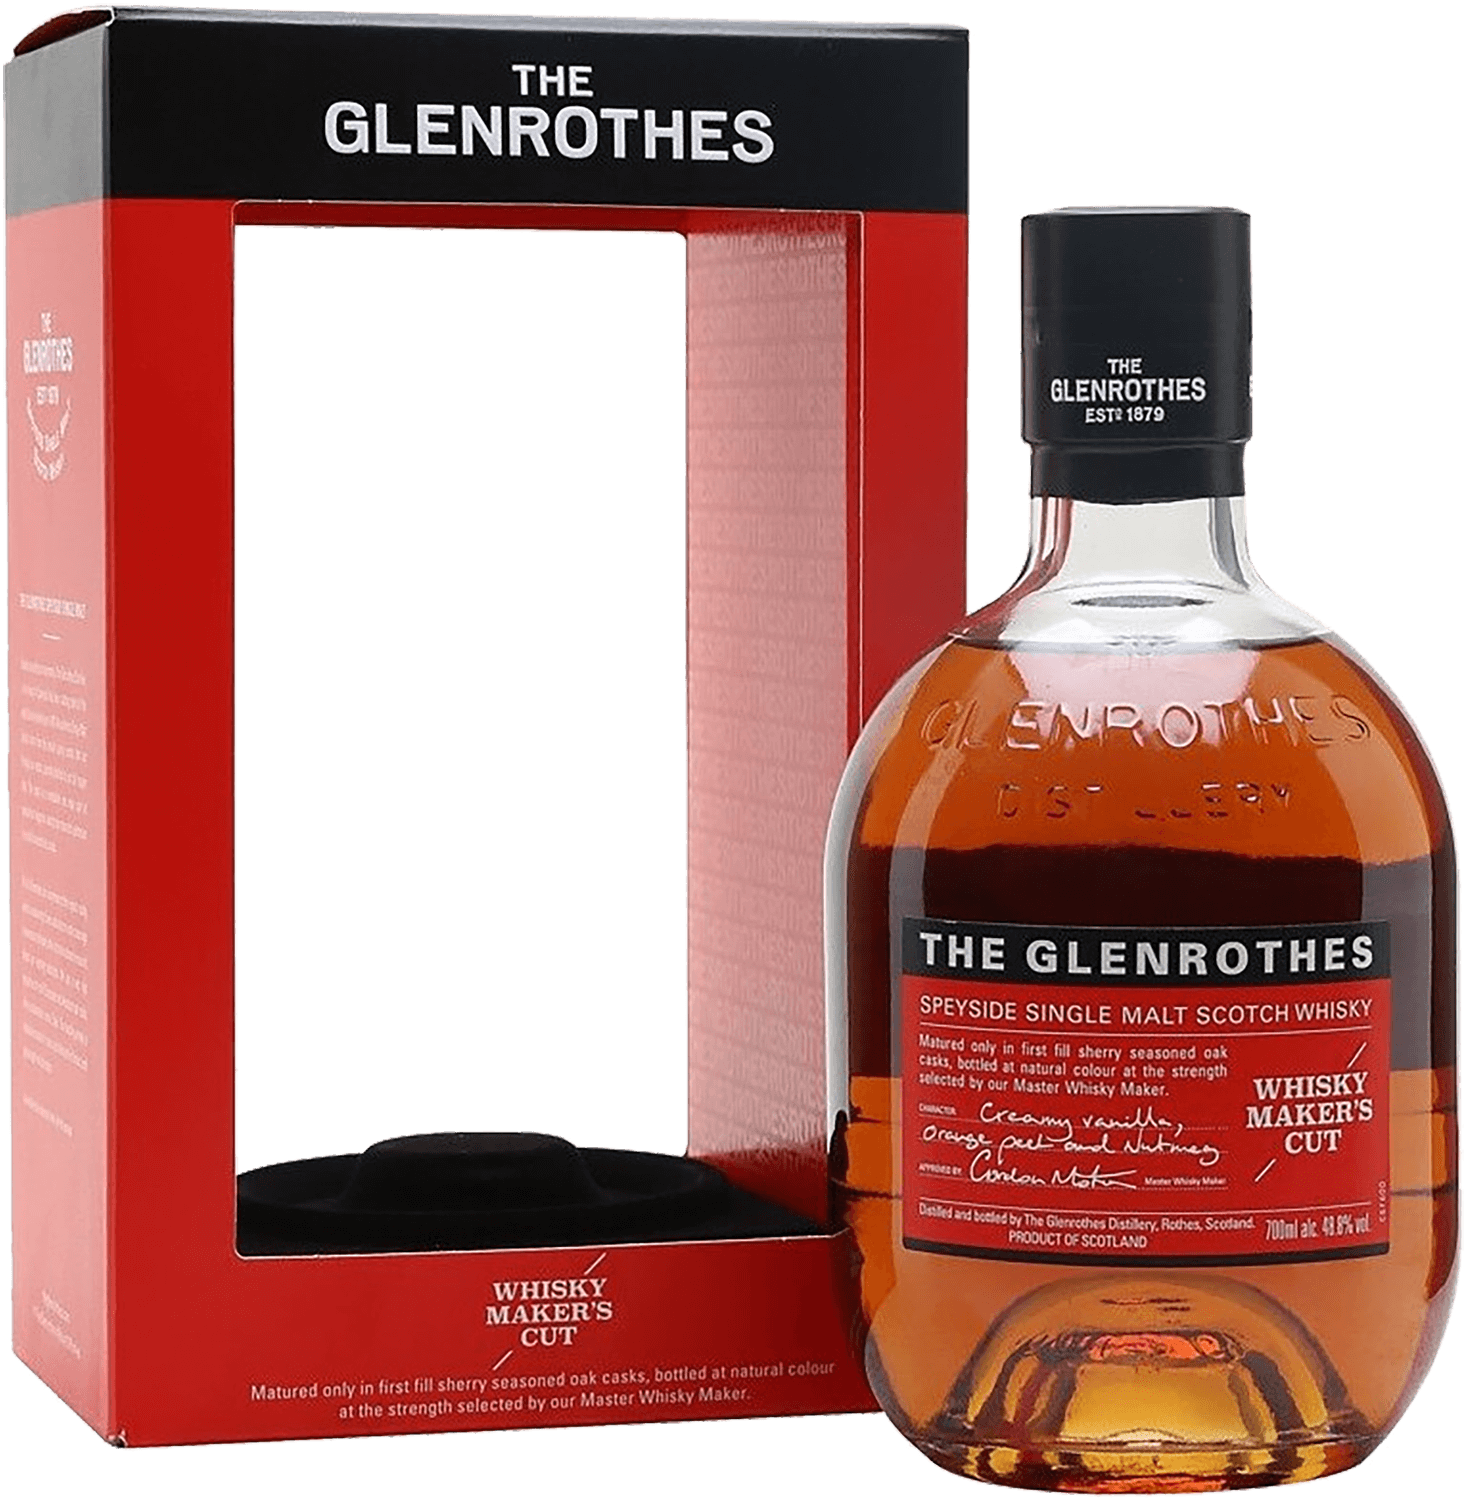 The Glenrothes Whisky Maker's Cut Speyside Single Malt Scotch Whisky (gift box) the glenrothes 18 y o speyside single malt scotch whisky gift box